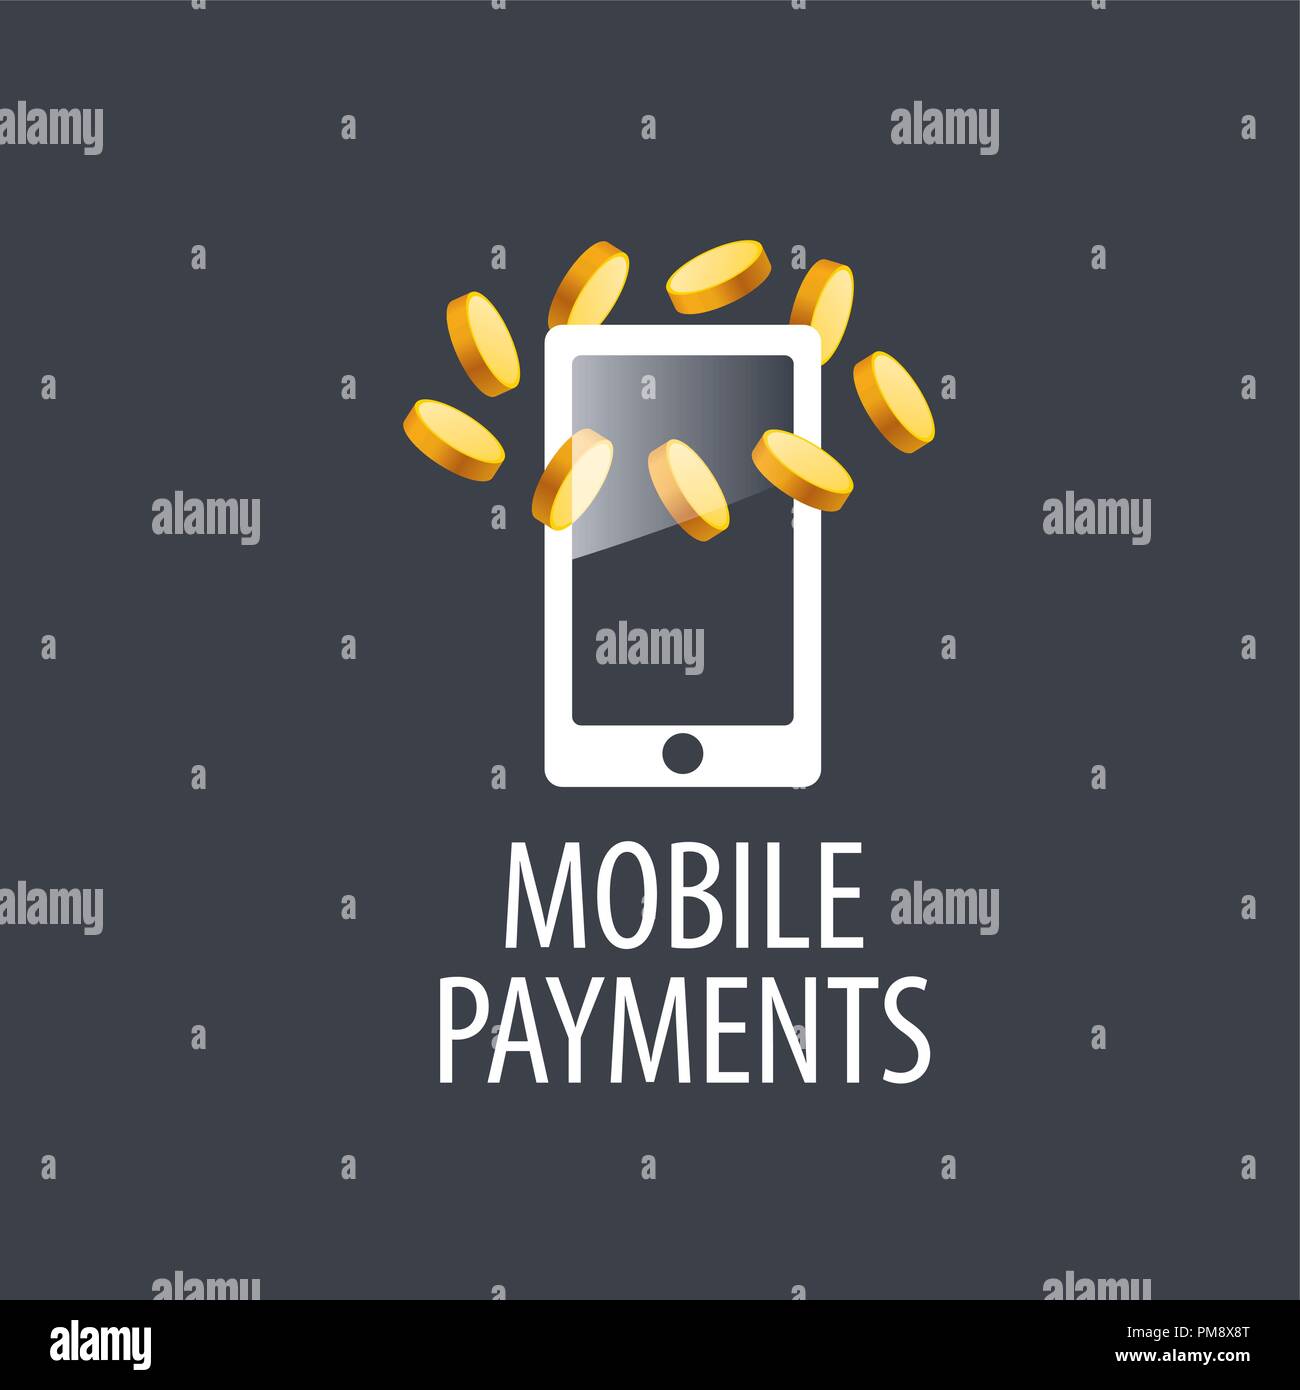 logo mobile payments Stock Vector